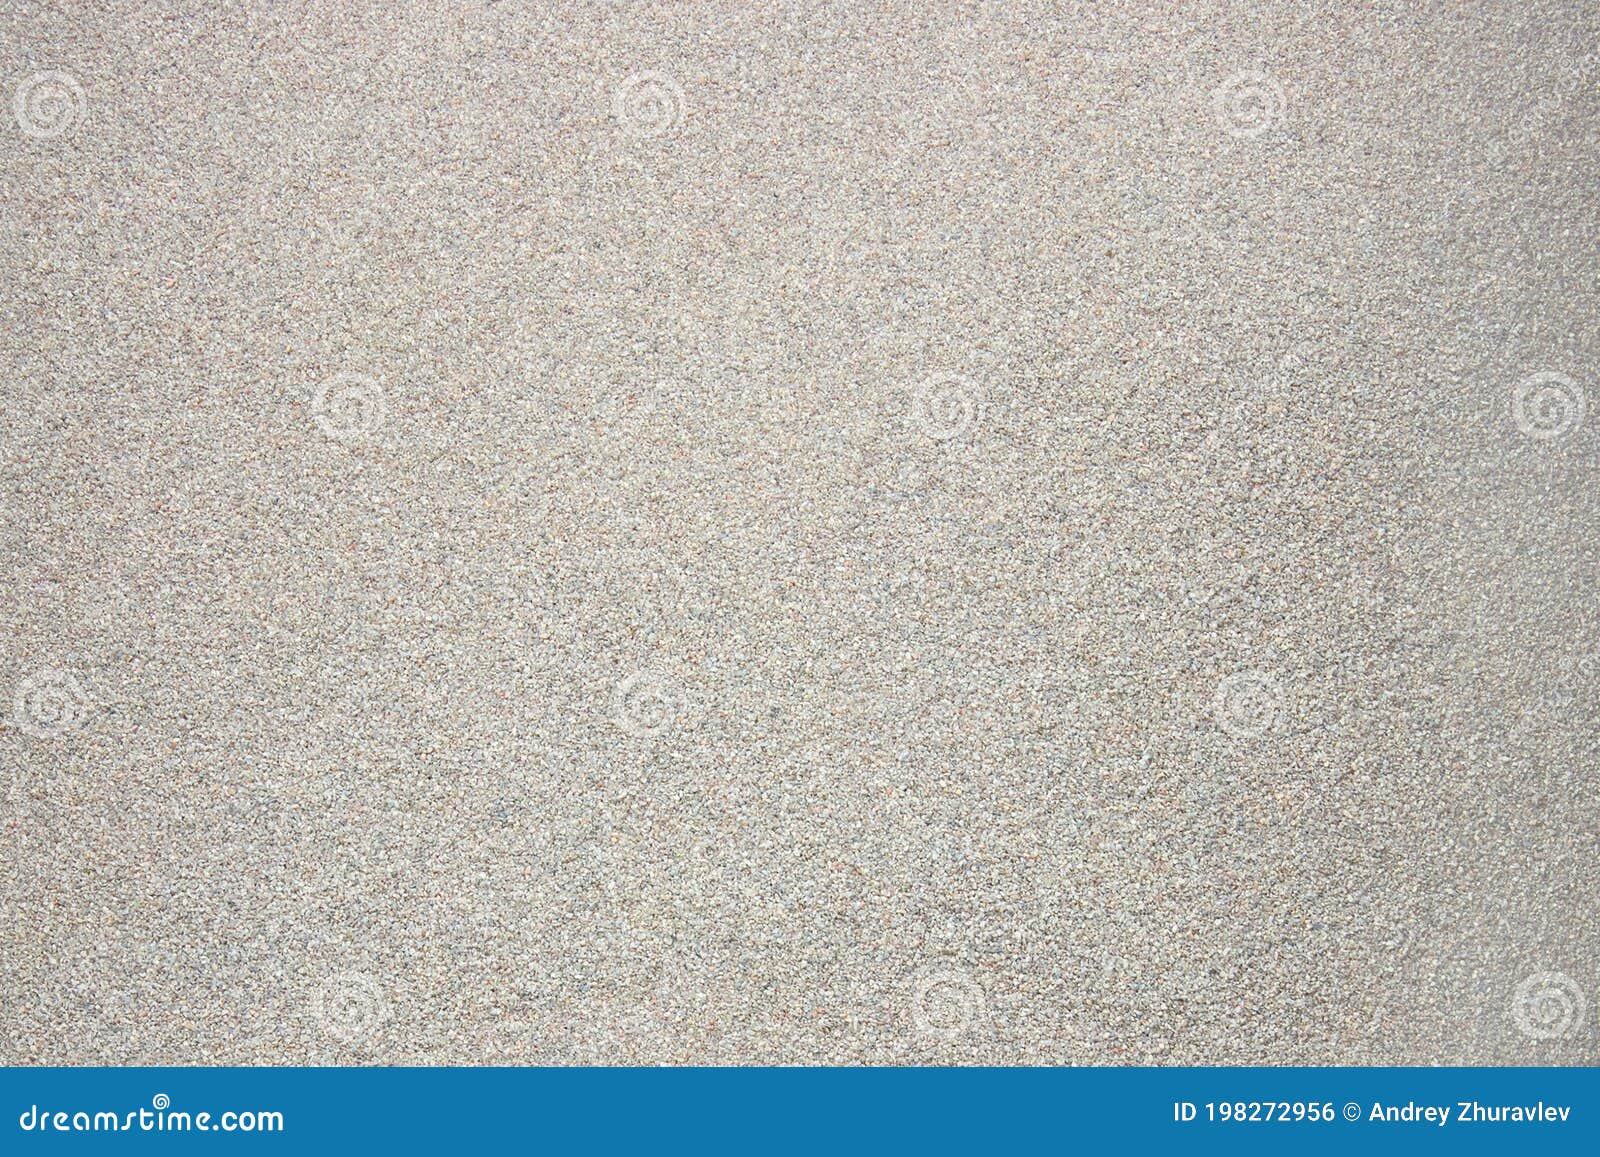 Gravel Texture, Natural Pebble Background. Stock Photo - Image of fine ...